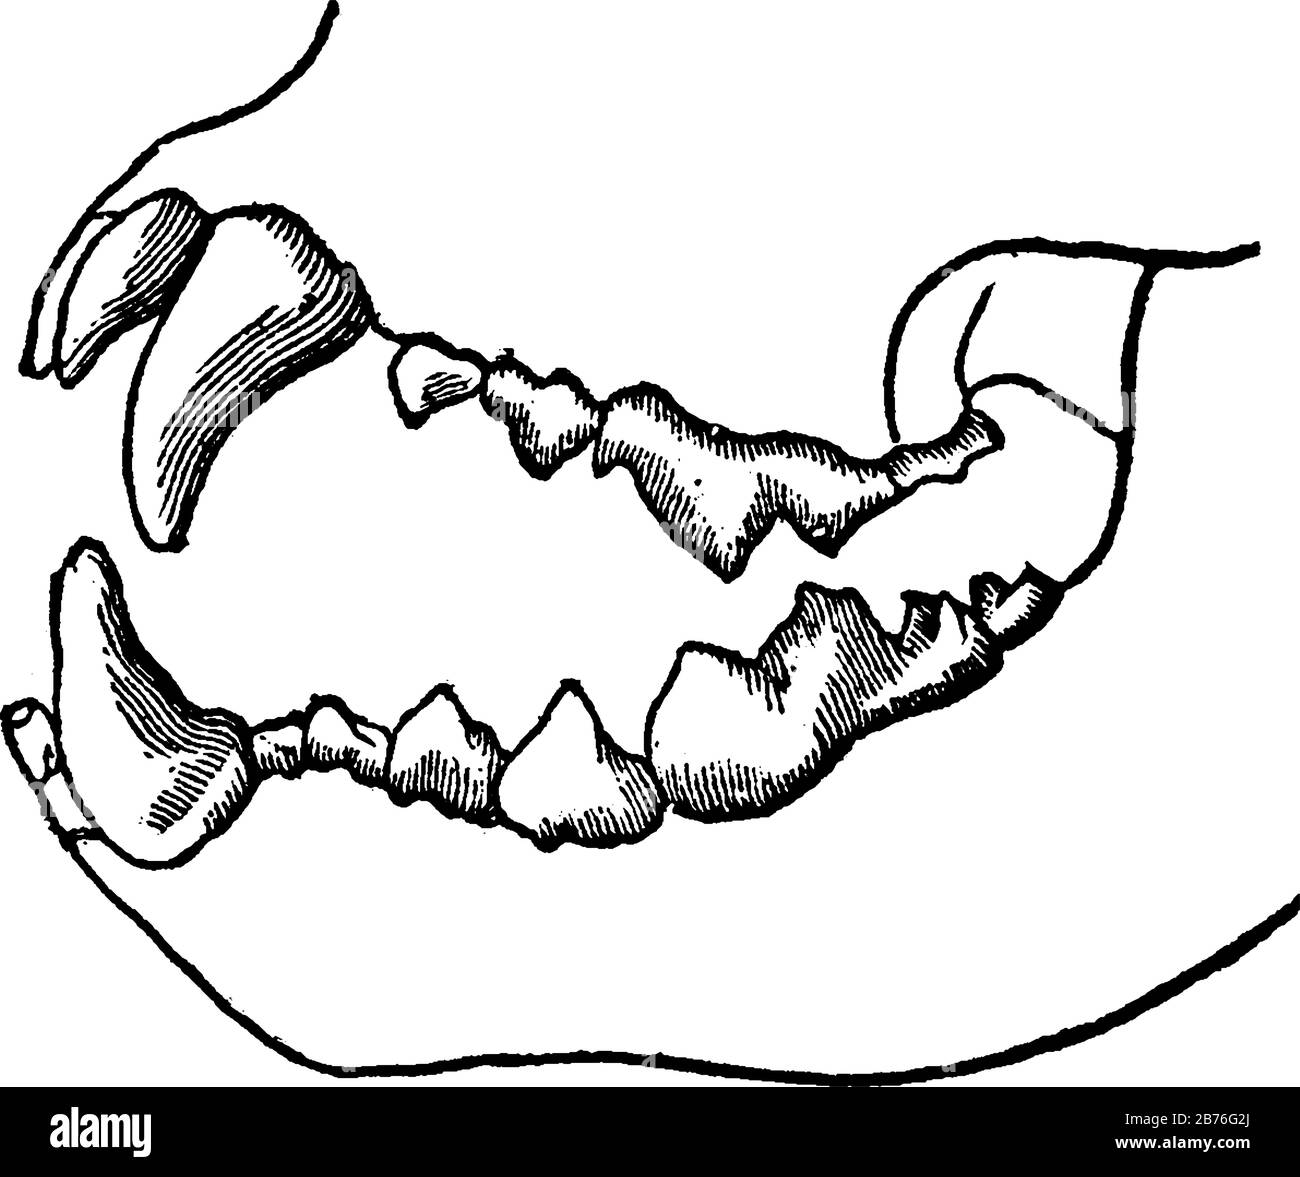 Carnivore teeth Black and White Stock Photos & Images - Alamy